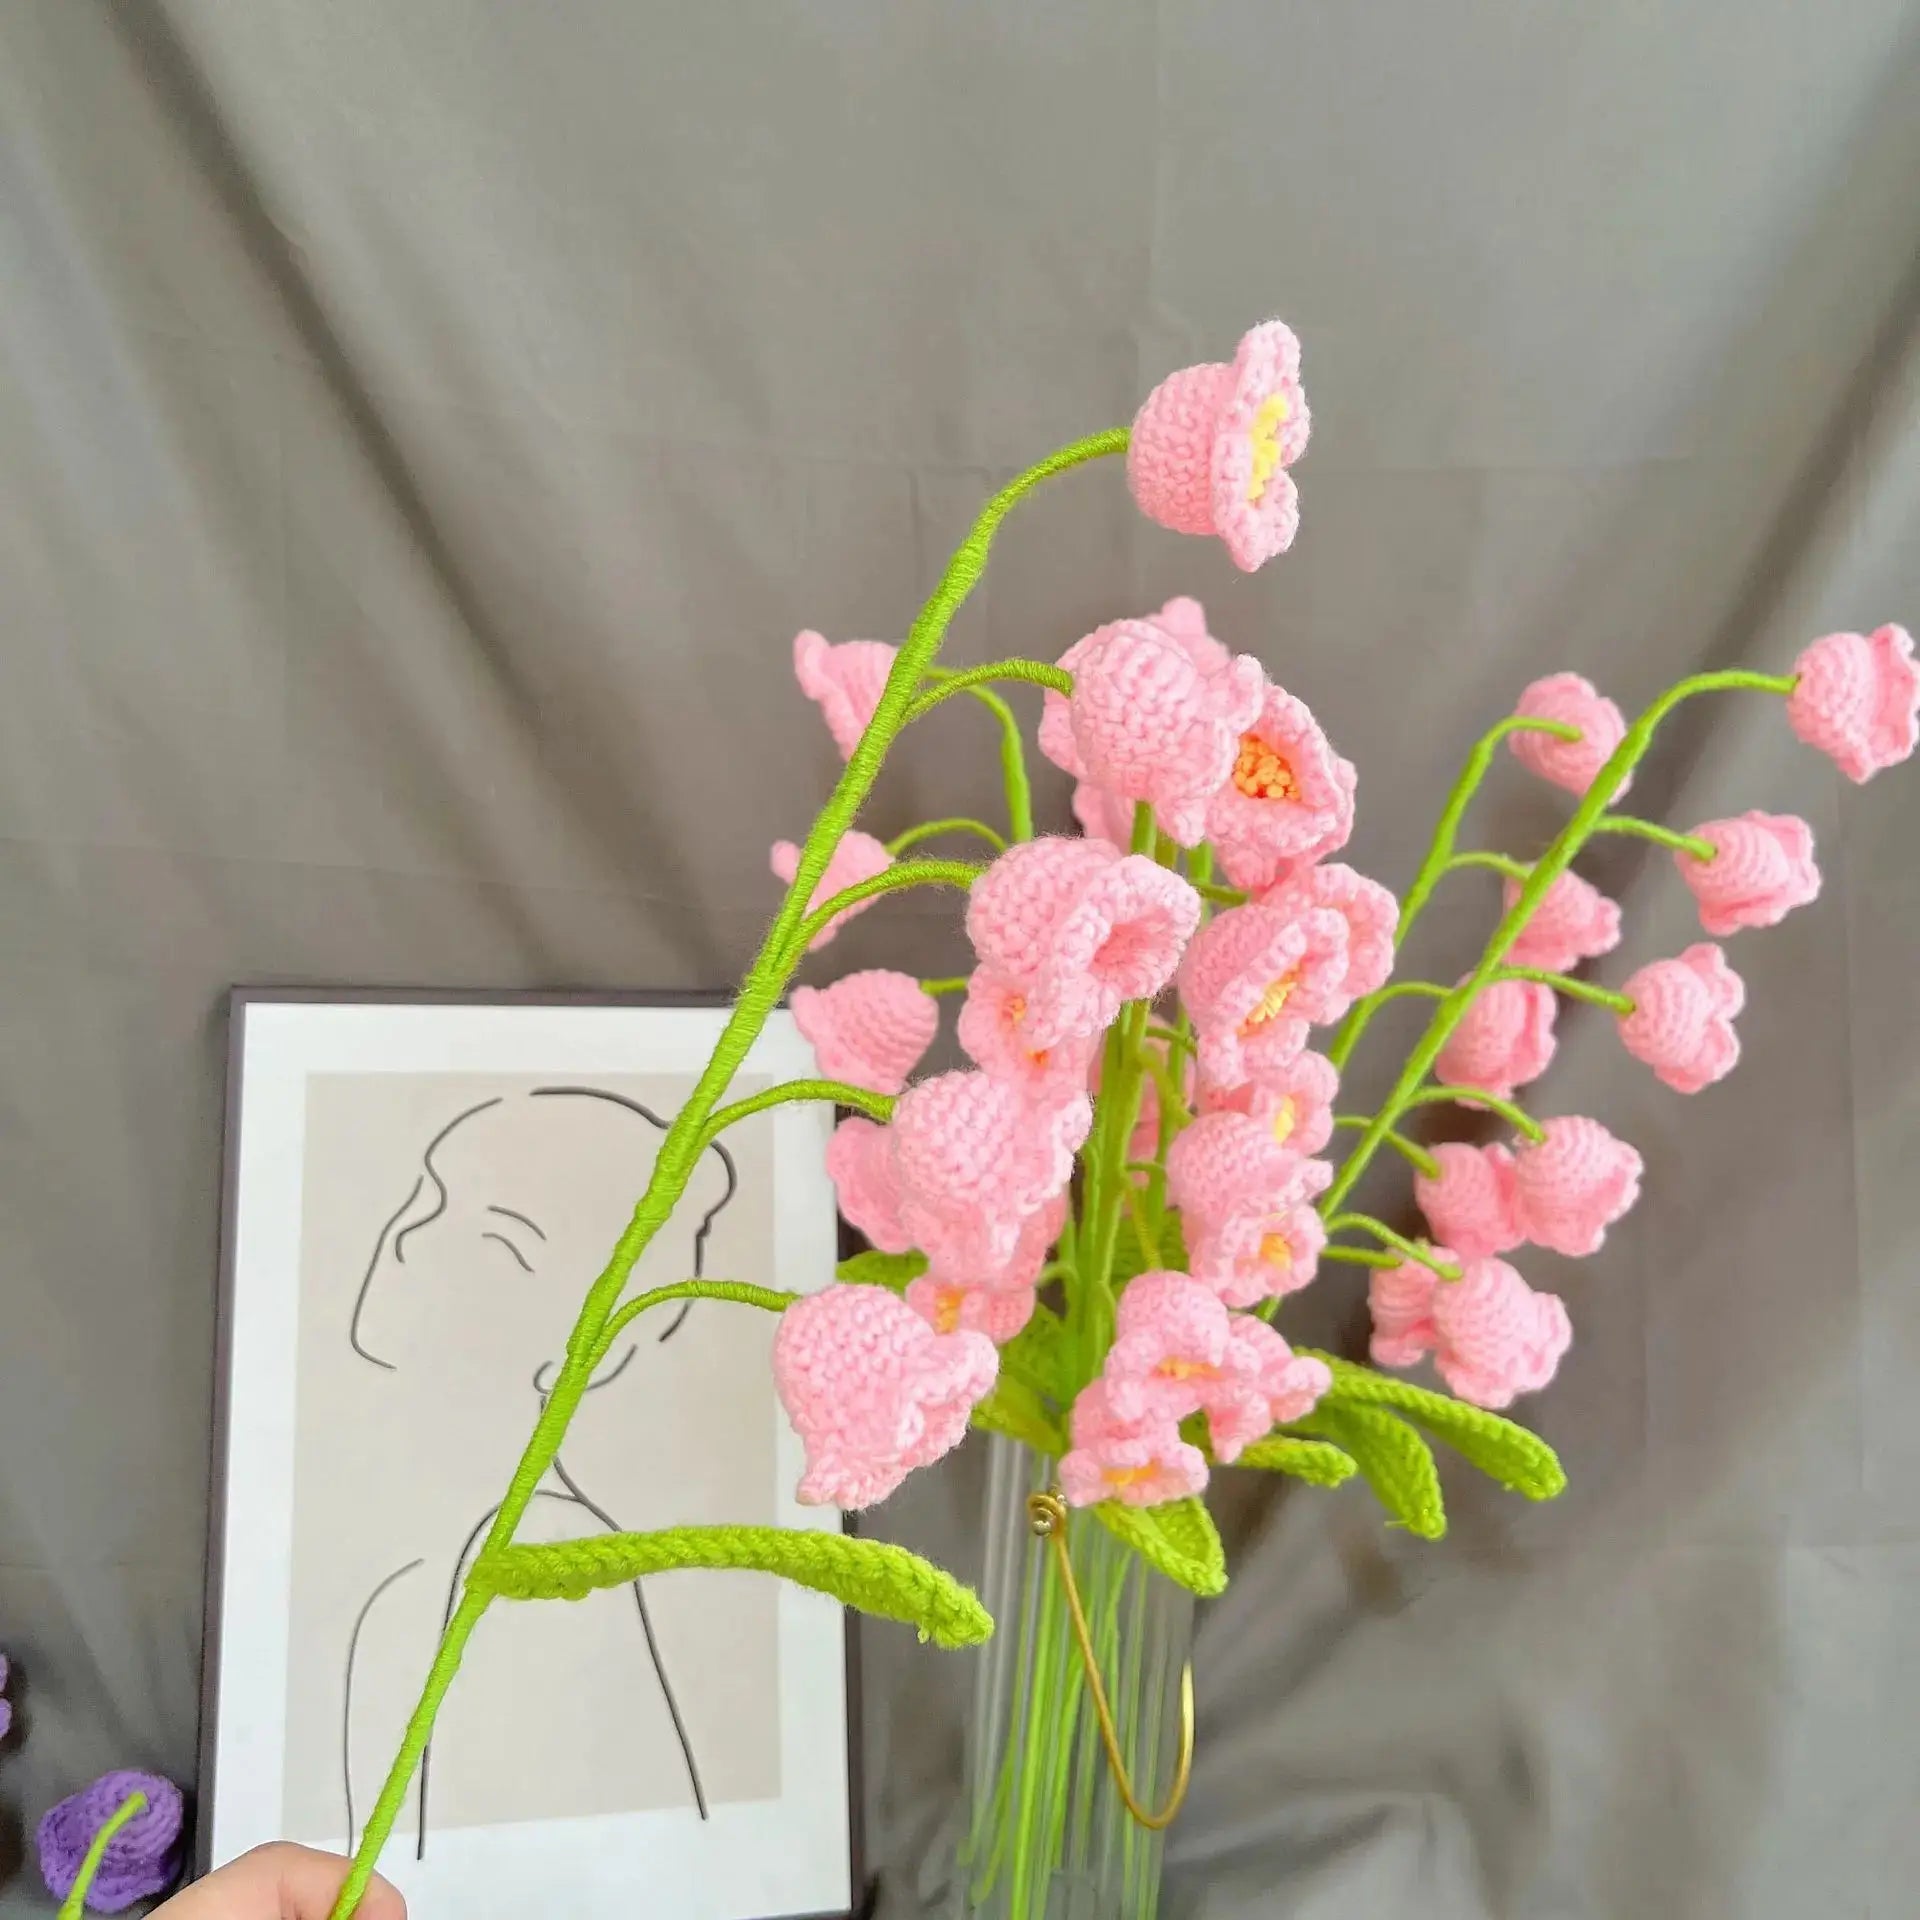 a vase filled with pink flowers next to a picture